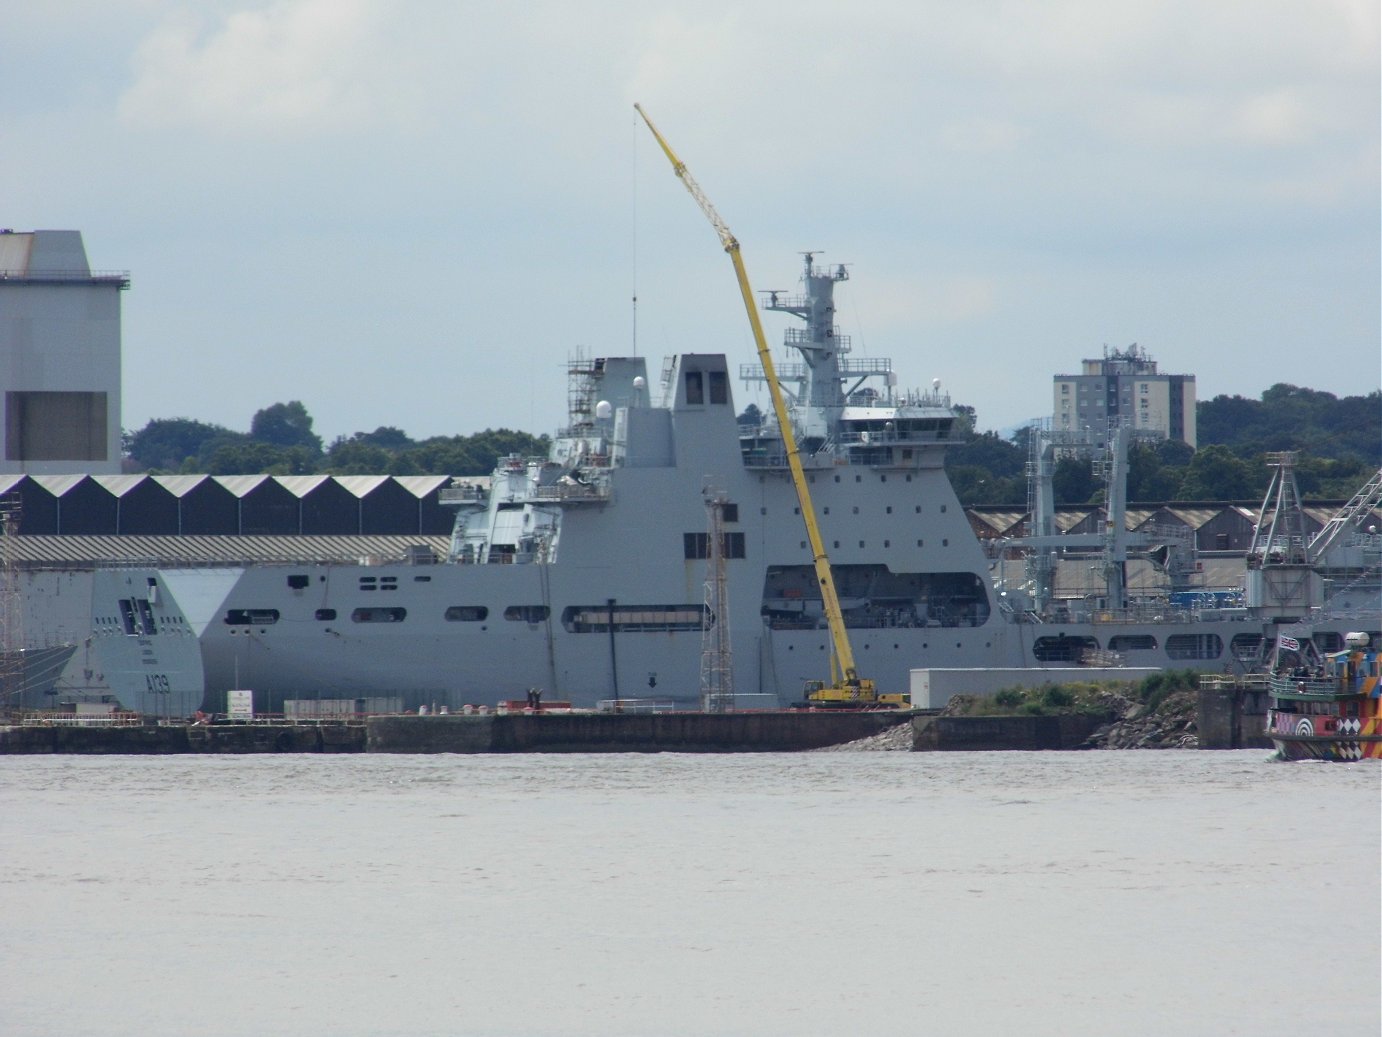 A139RFA Tide Force at Cammell Laird shipyard Friday 25 June 2021.